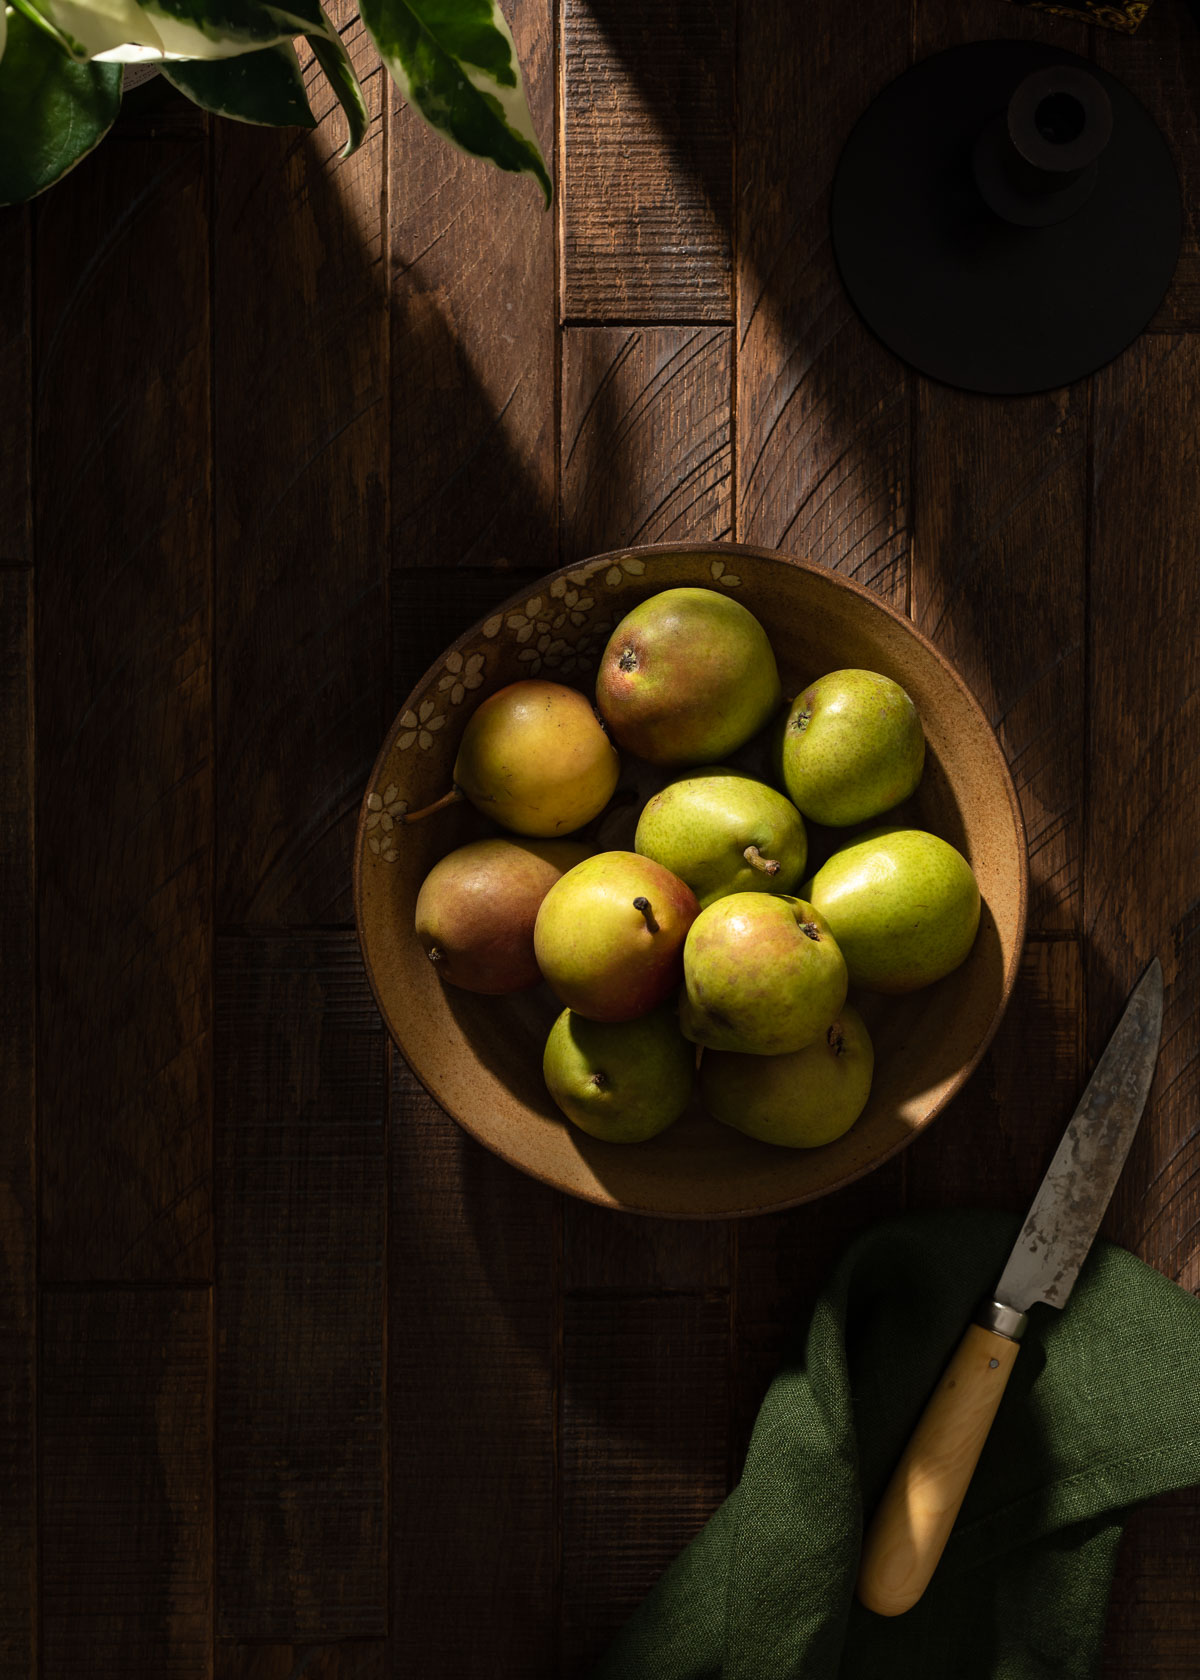 A rustic bowl of small Seckel pears on a dark wood table in strong shadow.